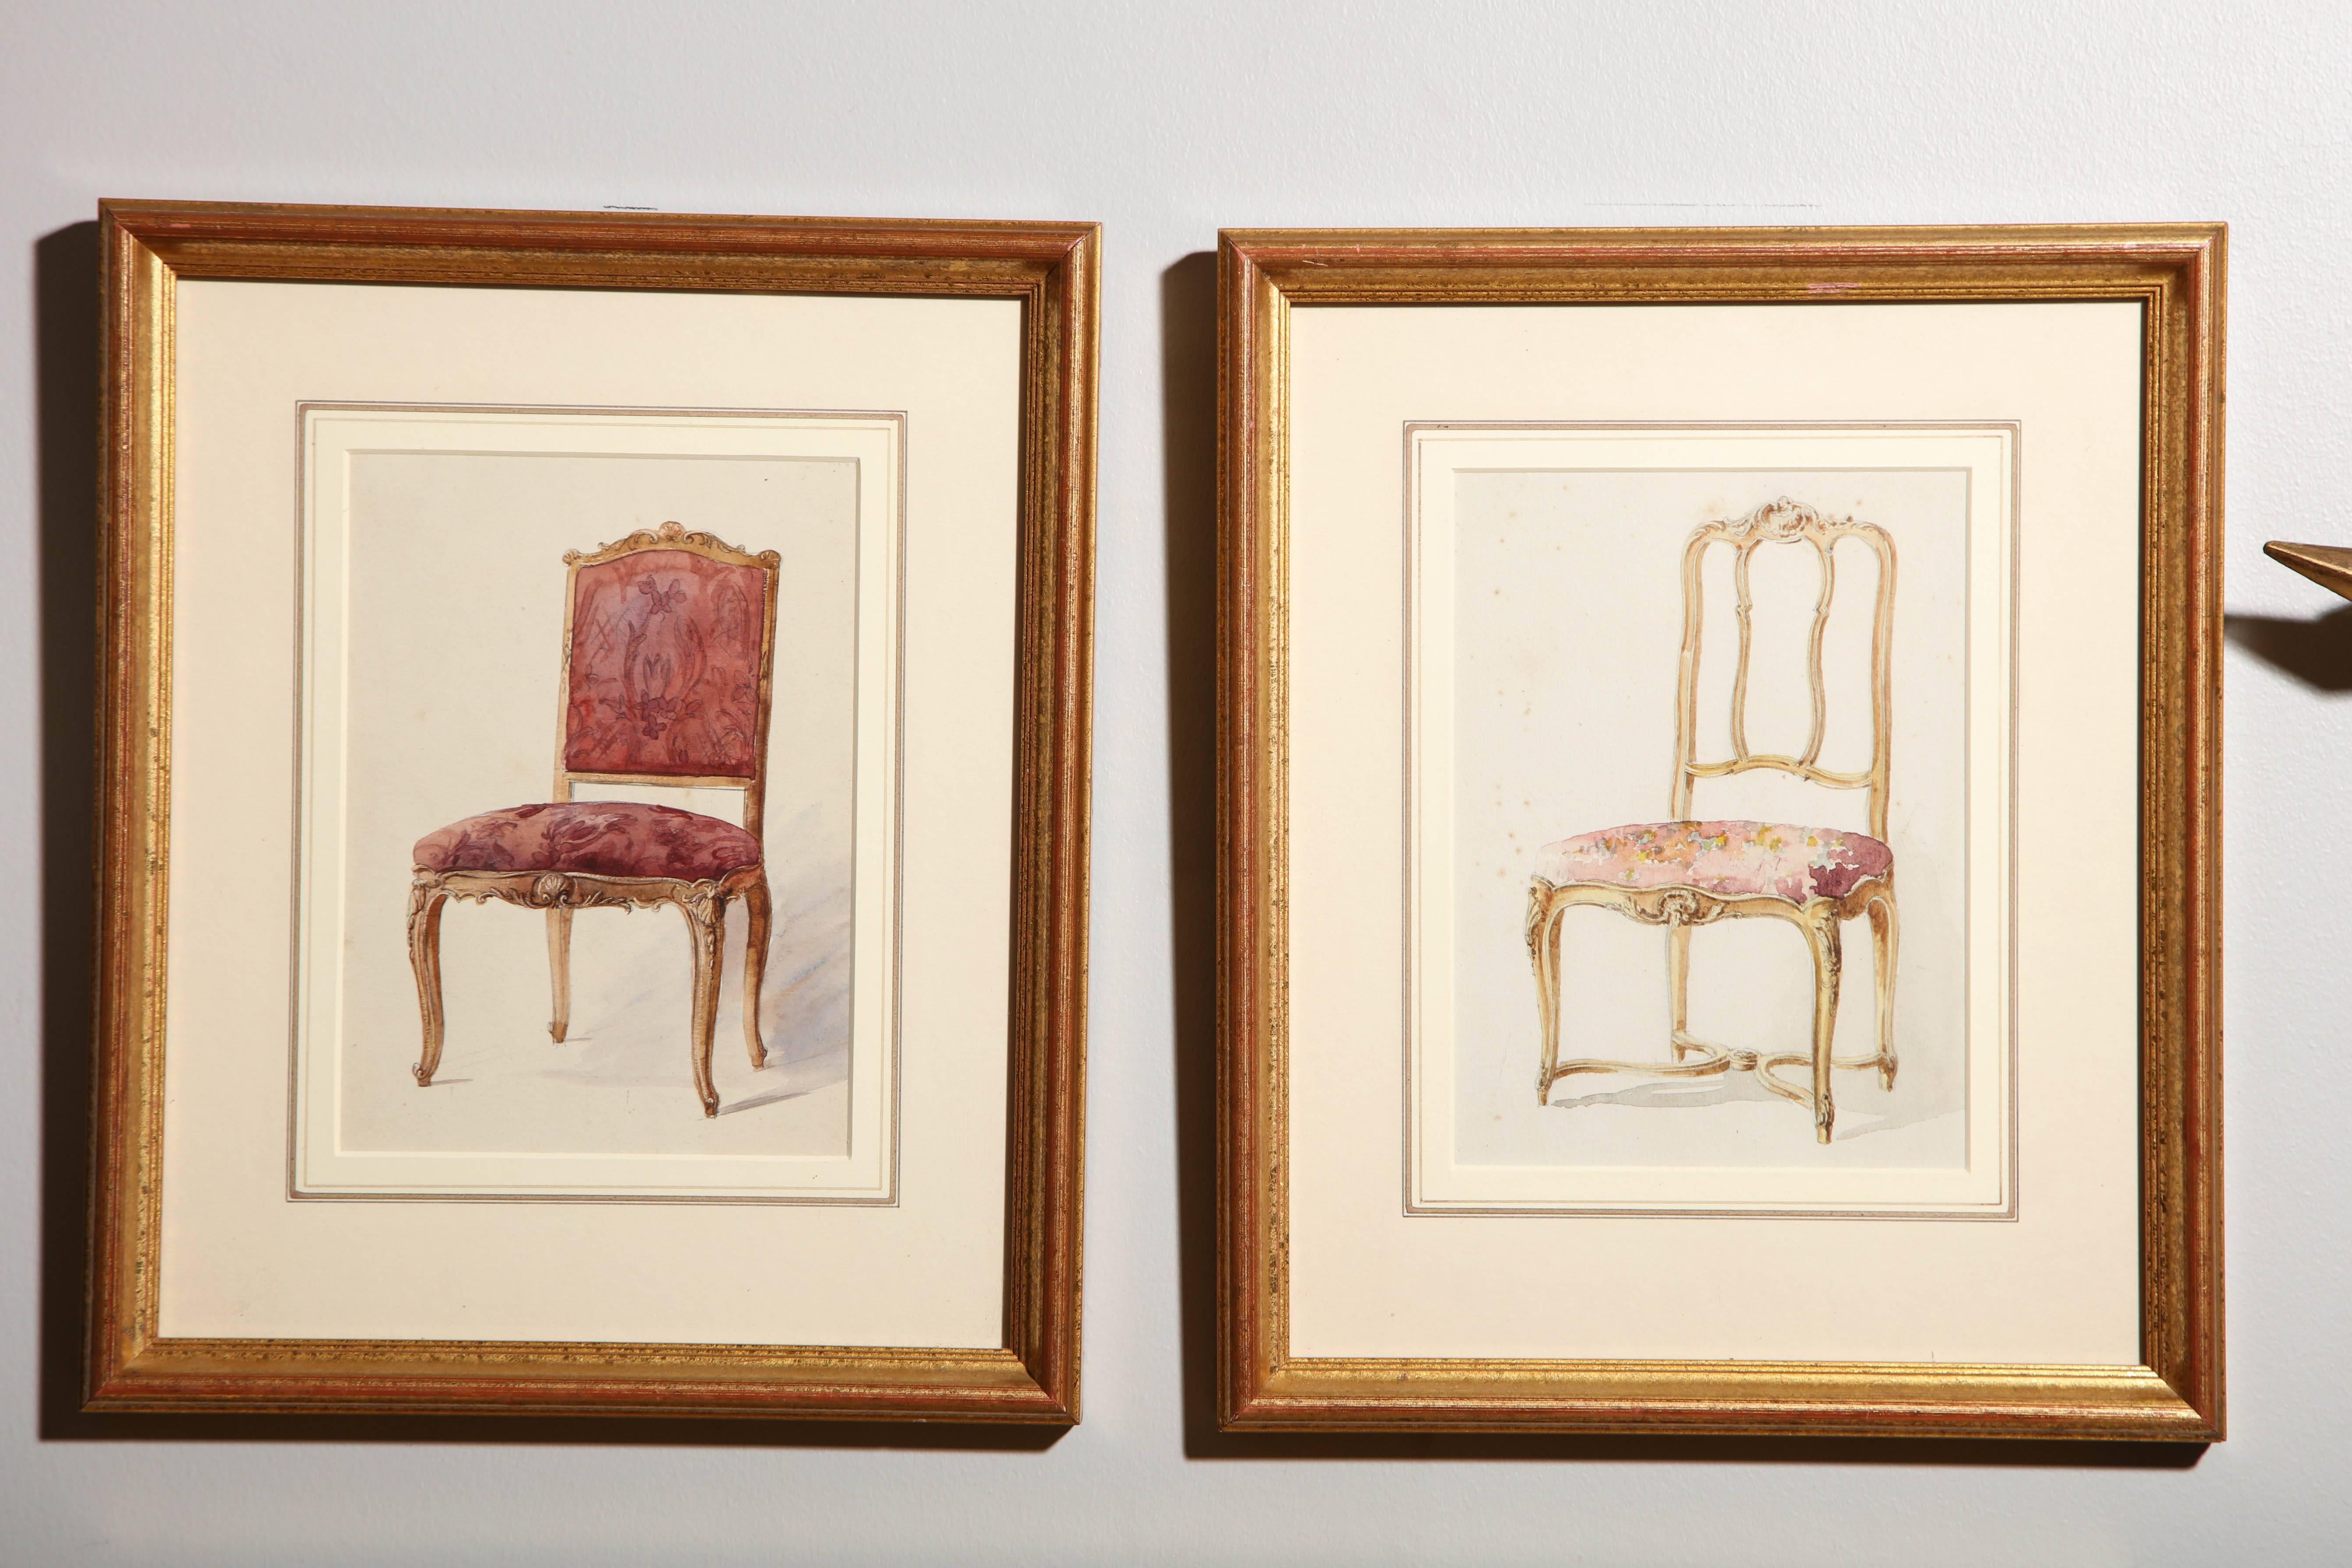 Series of Hand-Painted Drawings of Furniture 3